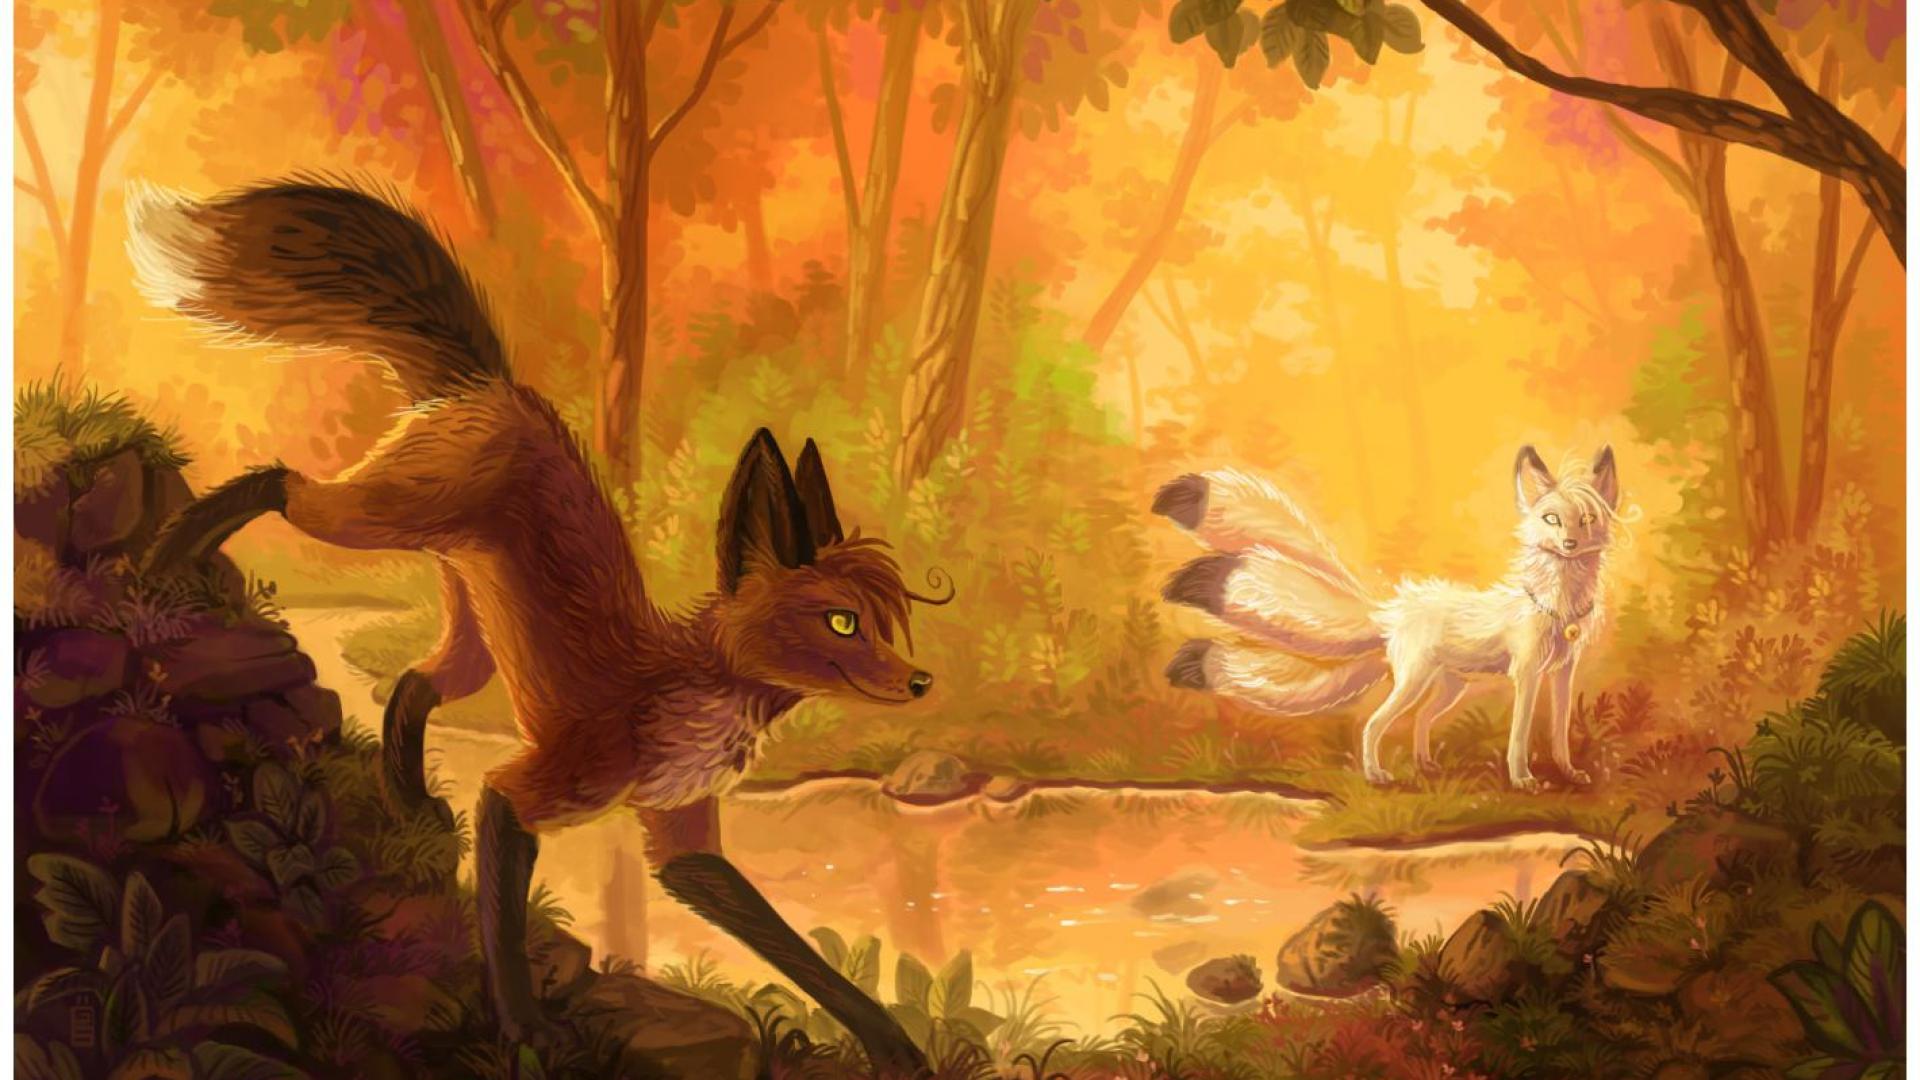 Anime Fox Wallpapers - Mythical Creatures Nature Deer Anime - HD Wallpaper 